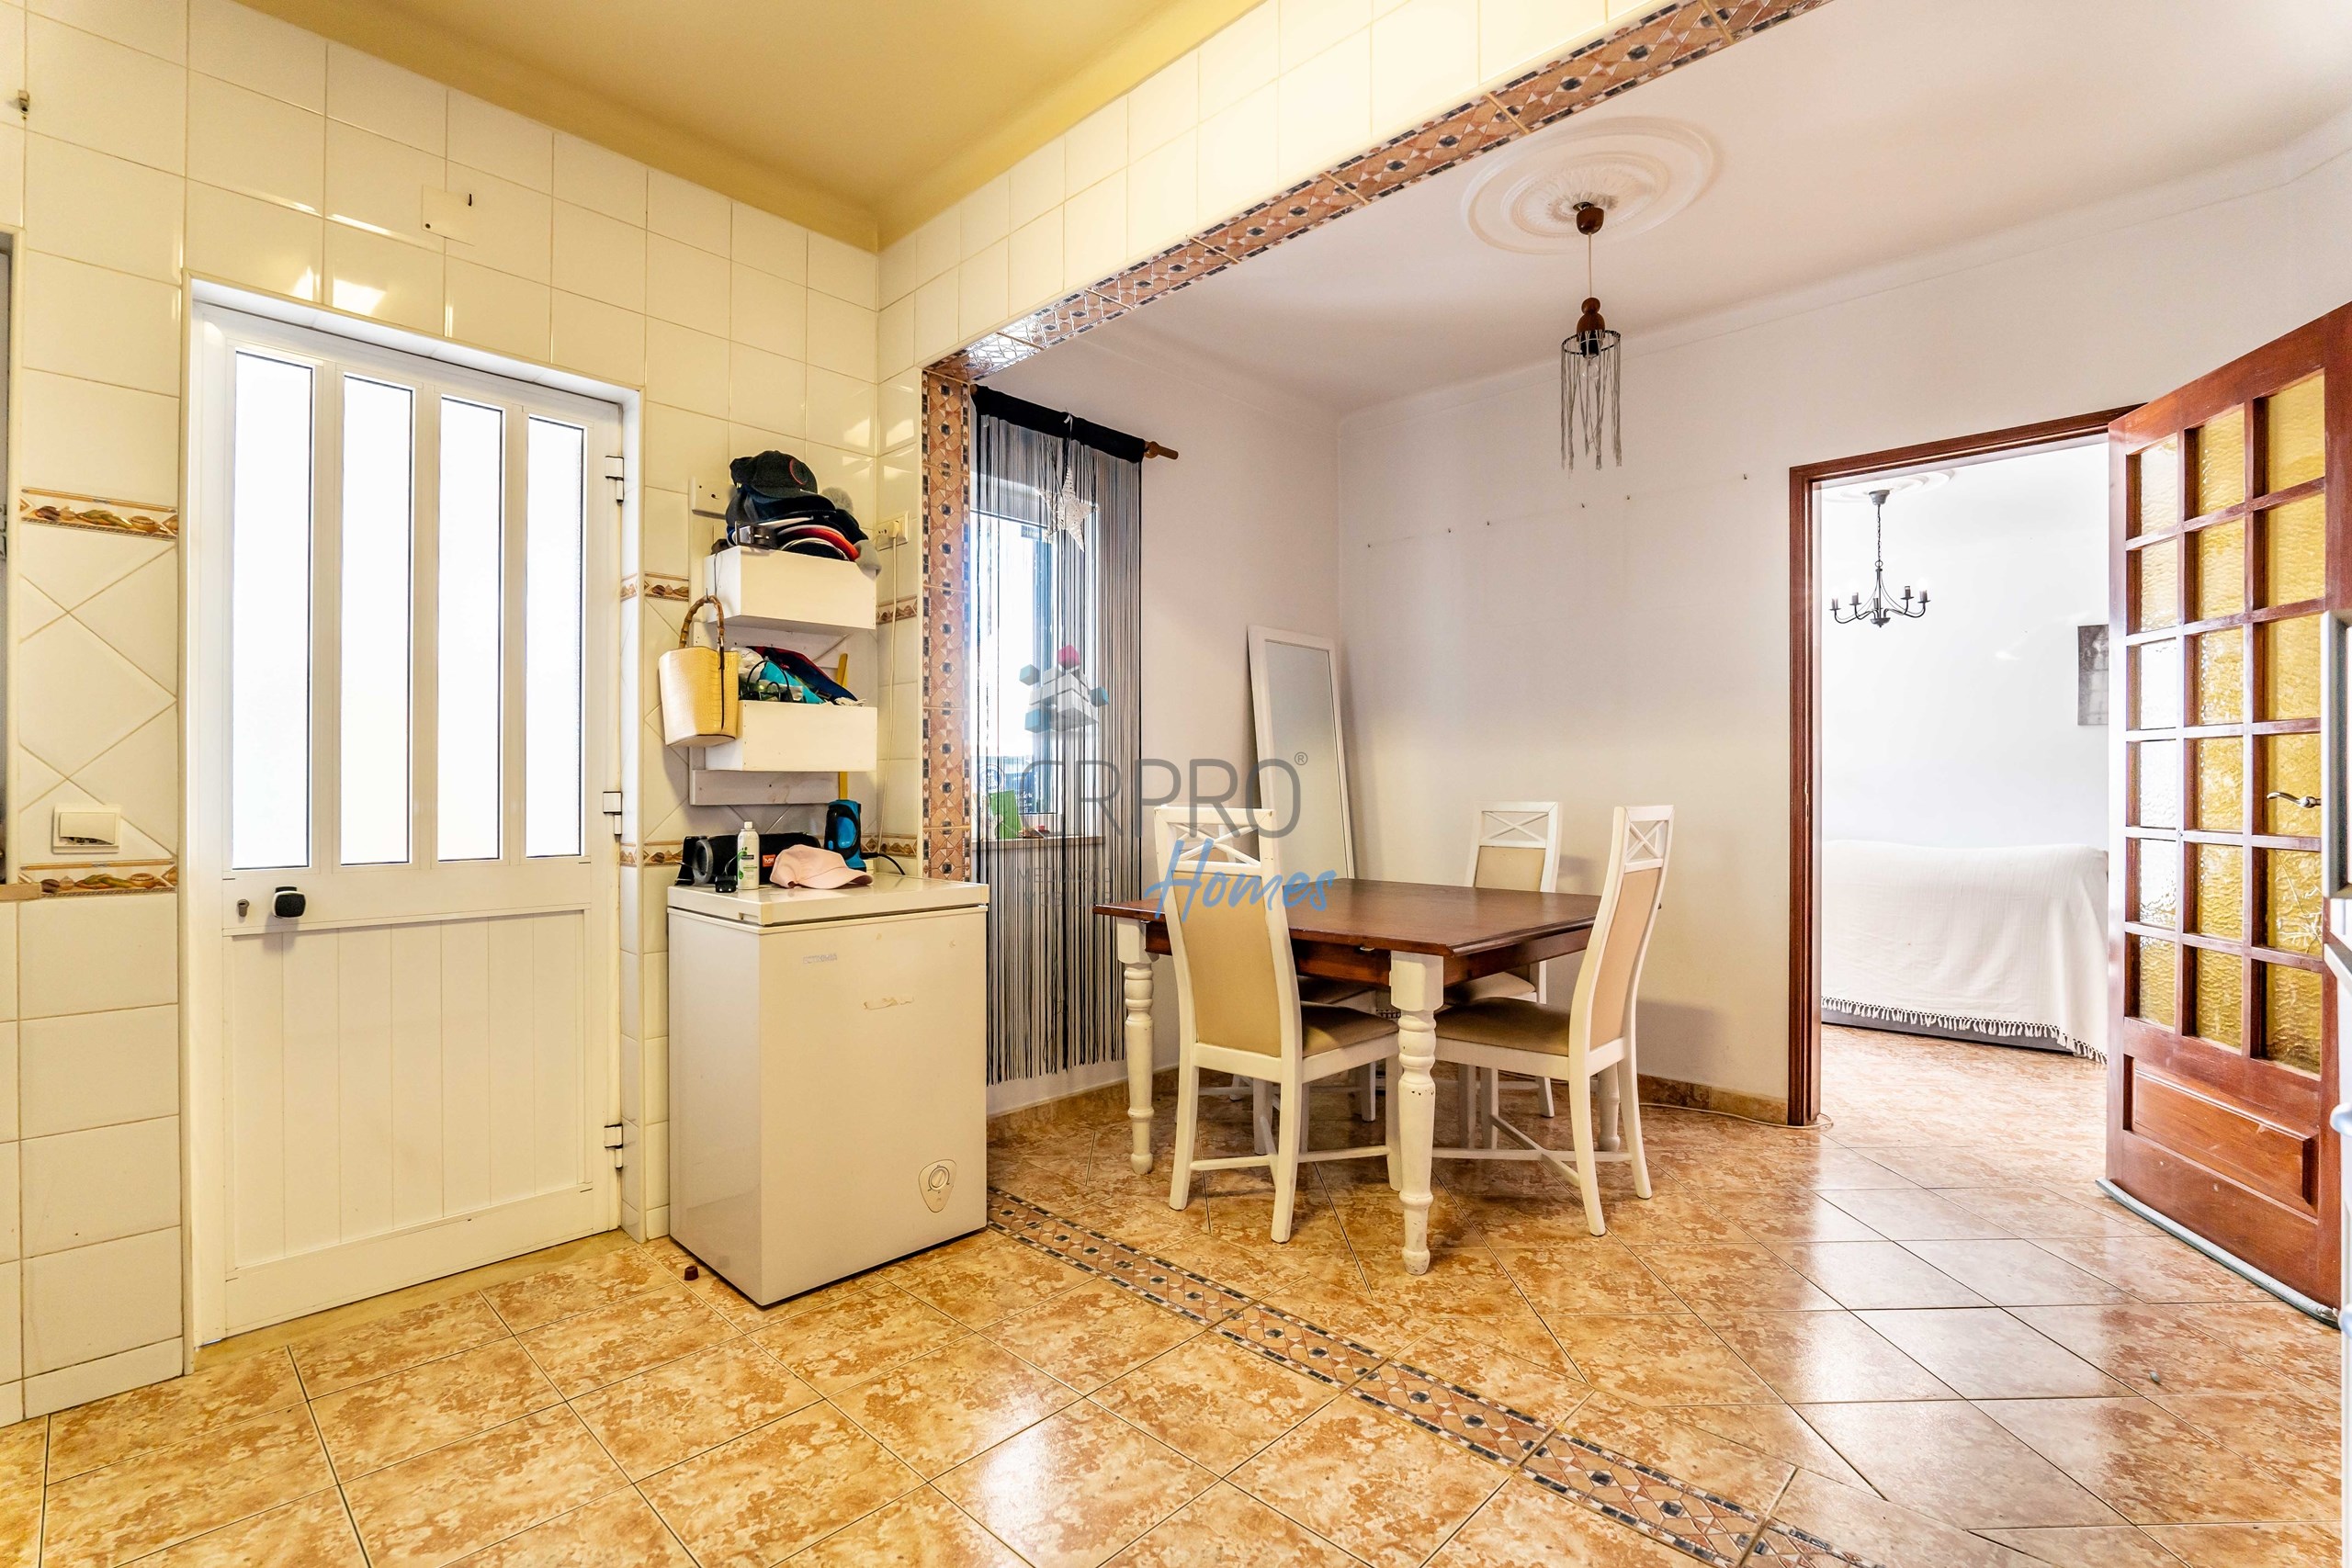 T2+2 semi-detached house for sale, located in the Caliços residential area in Albufeira. 